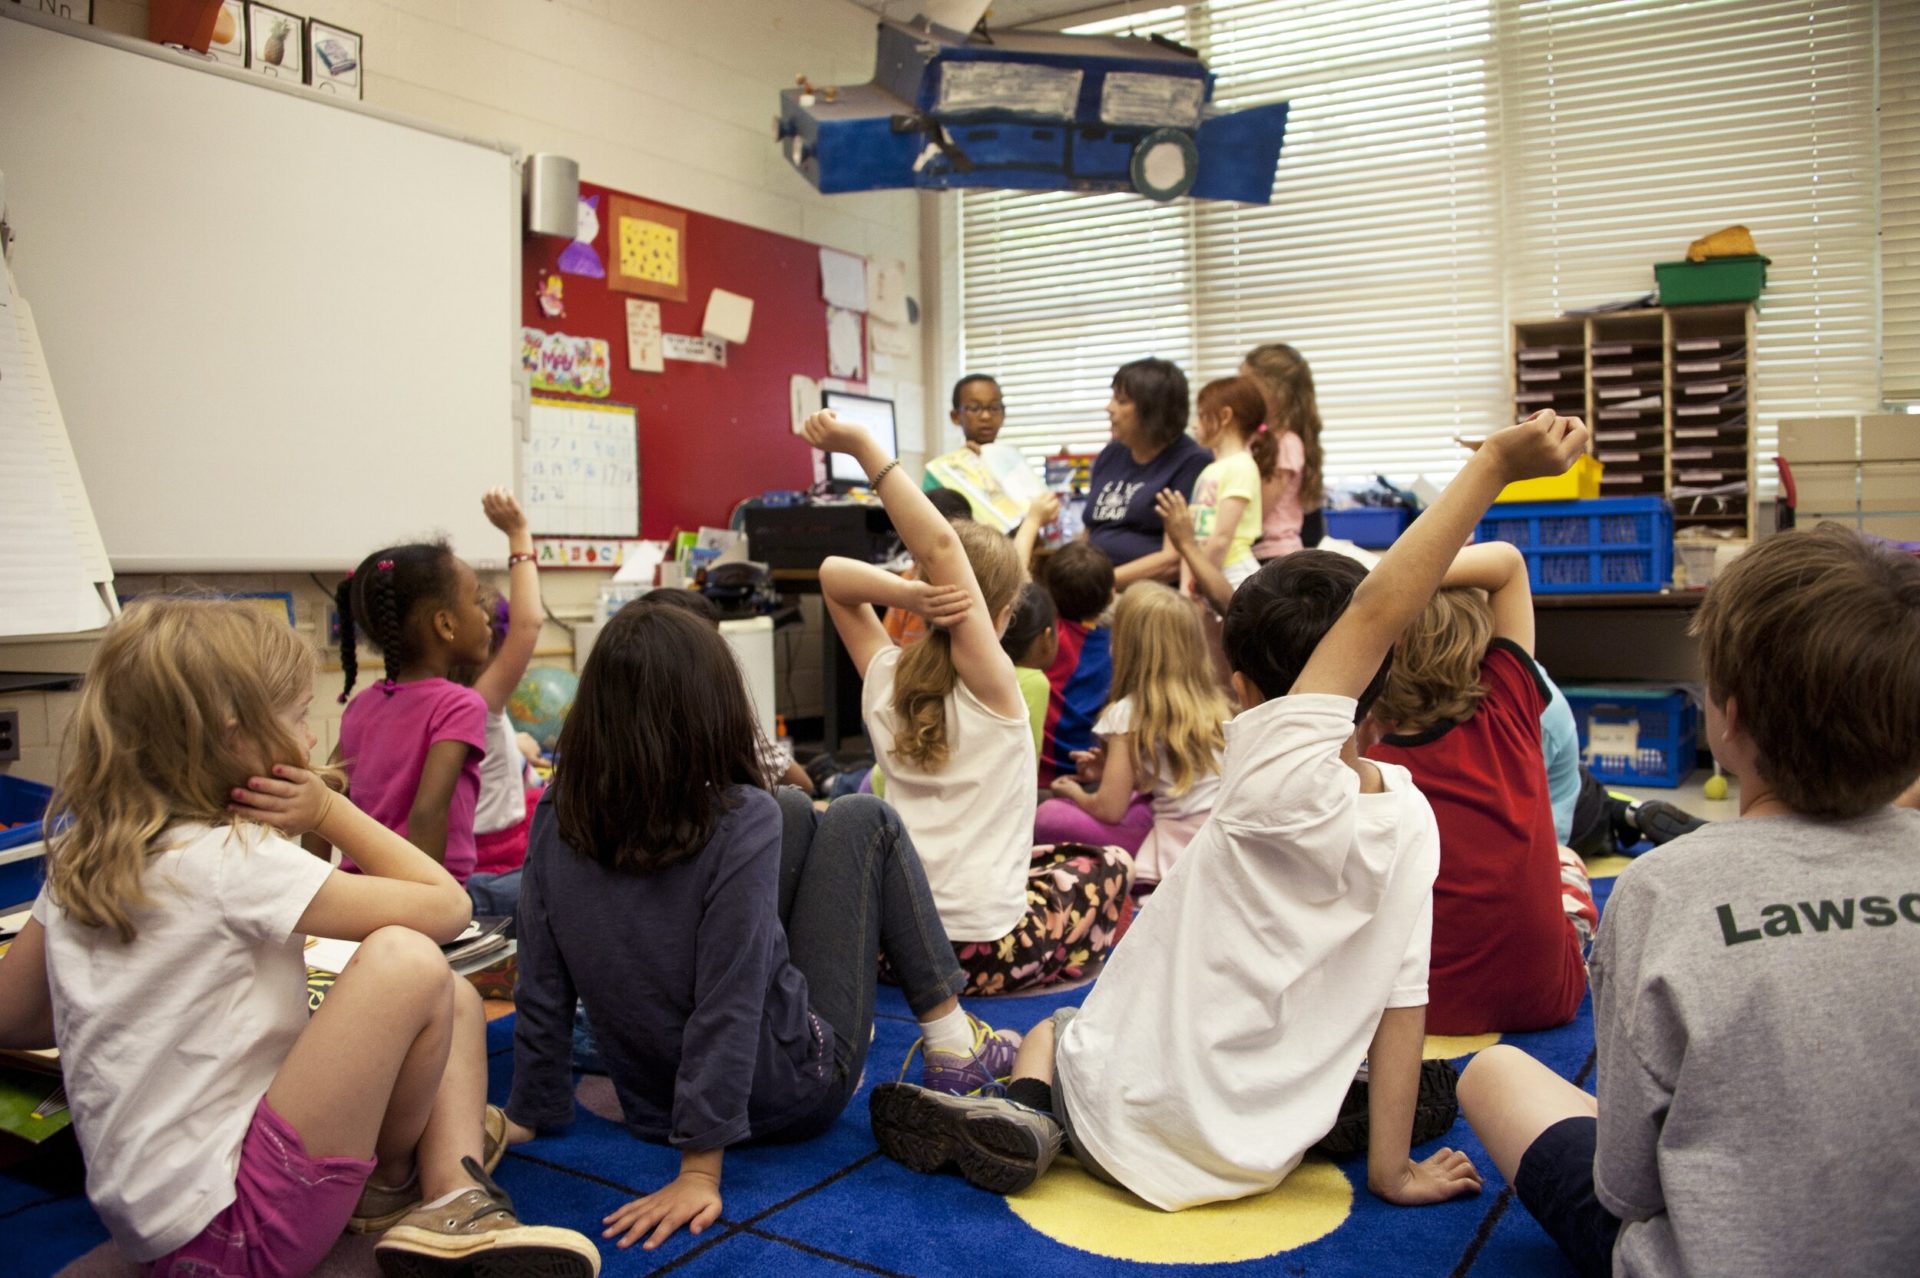 A scene from a primary school located in Atlanta, Georgia. (The Public Health Image Library from the Centers for Disease Control and Prevention)